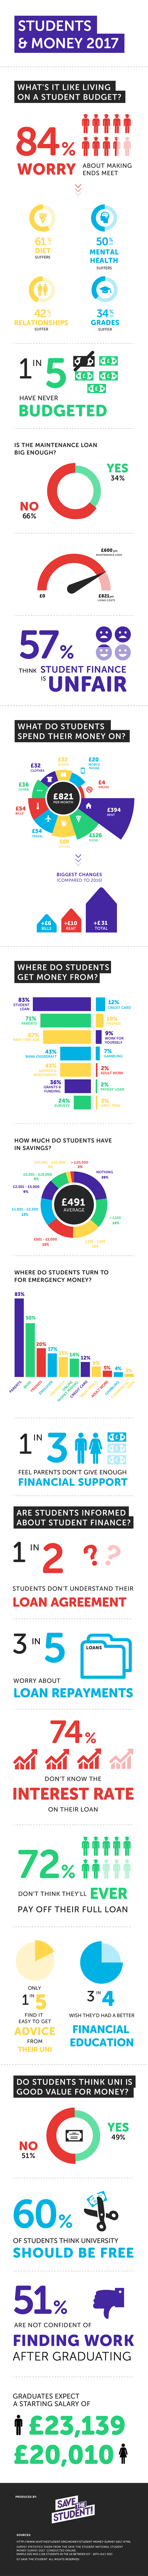 Students and money 2017